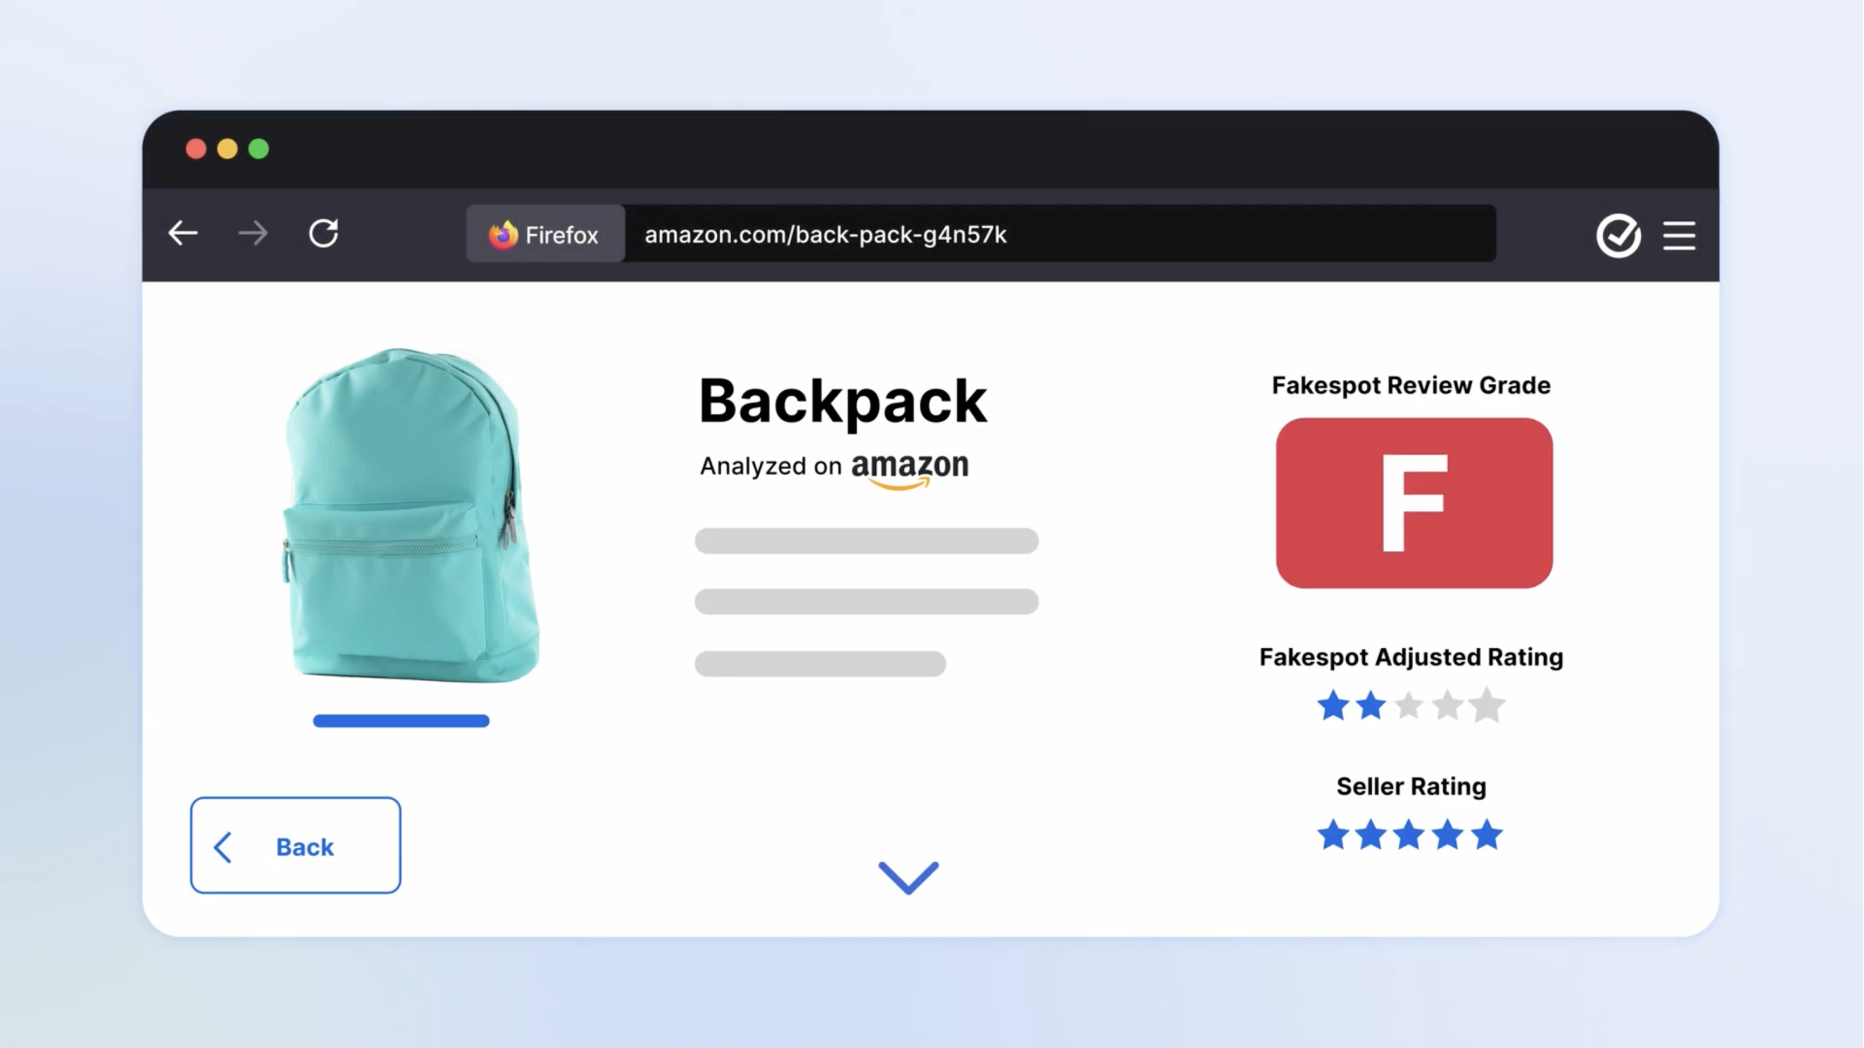 The backpack gets Fakespot Review Grade "F", Fakespot Adjusted Rating of 2 stars, Seller Rating of 5 stars as shown by Firefox on an amazon.com/back-pack